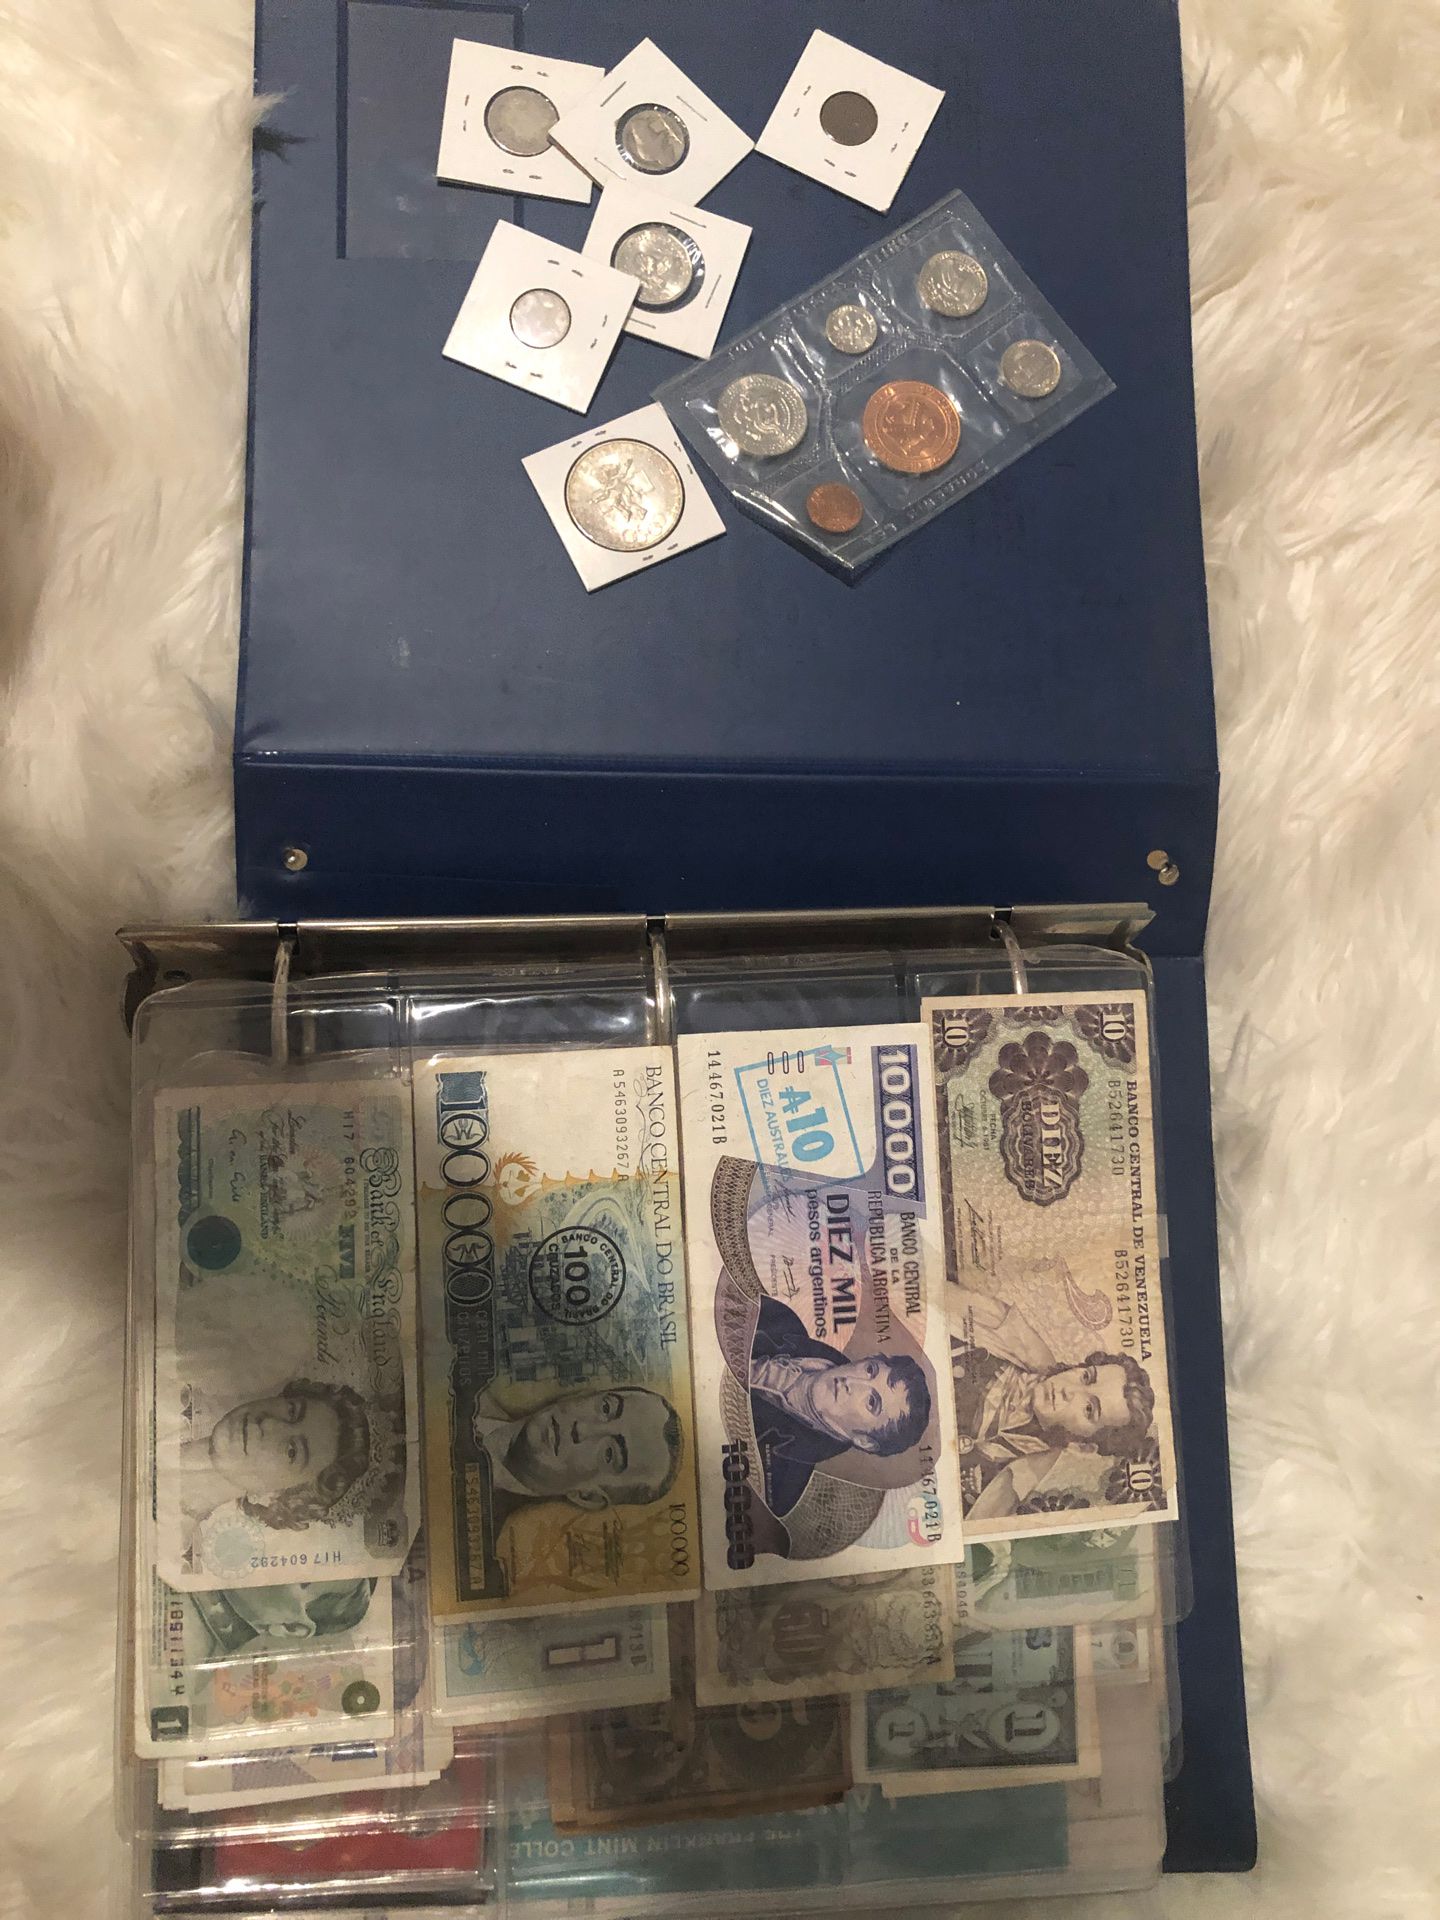 Binder of collectible real coins and bills from all over the world